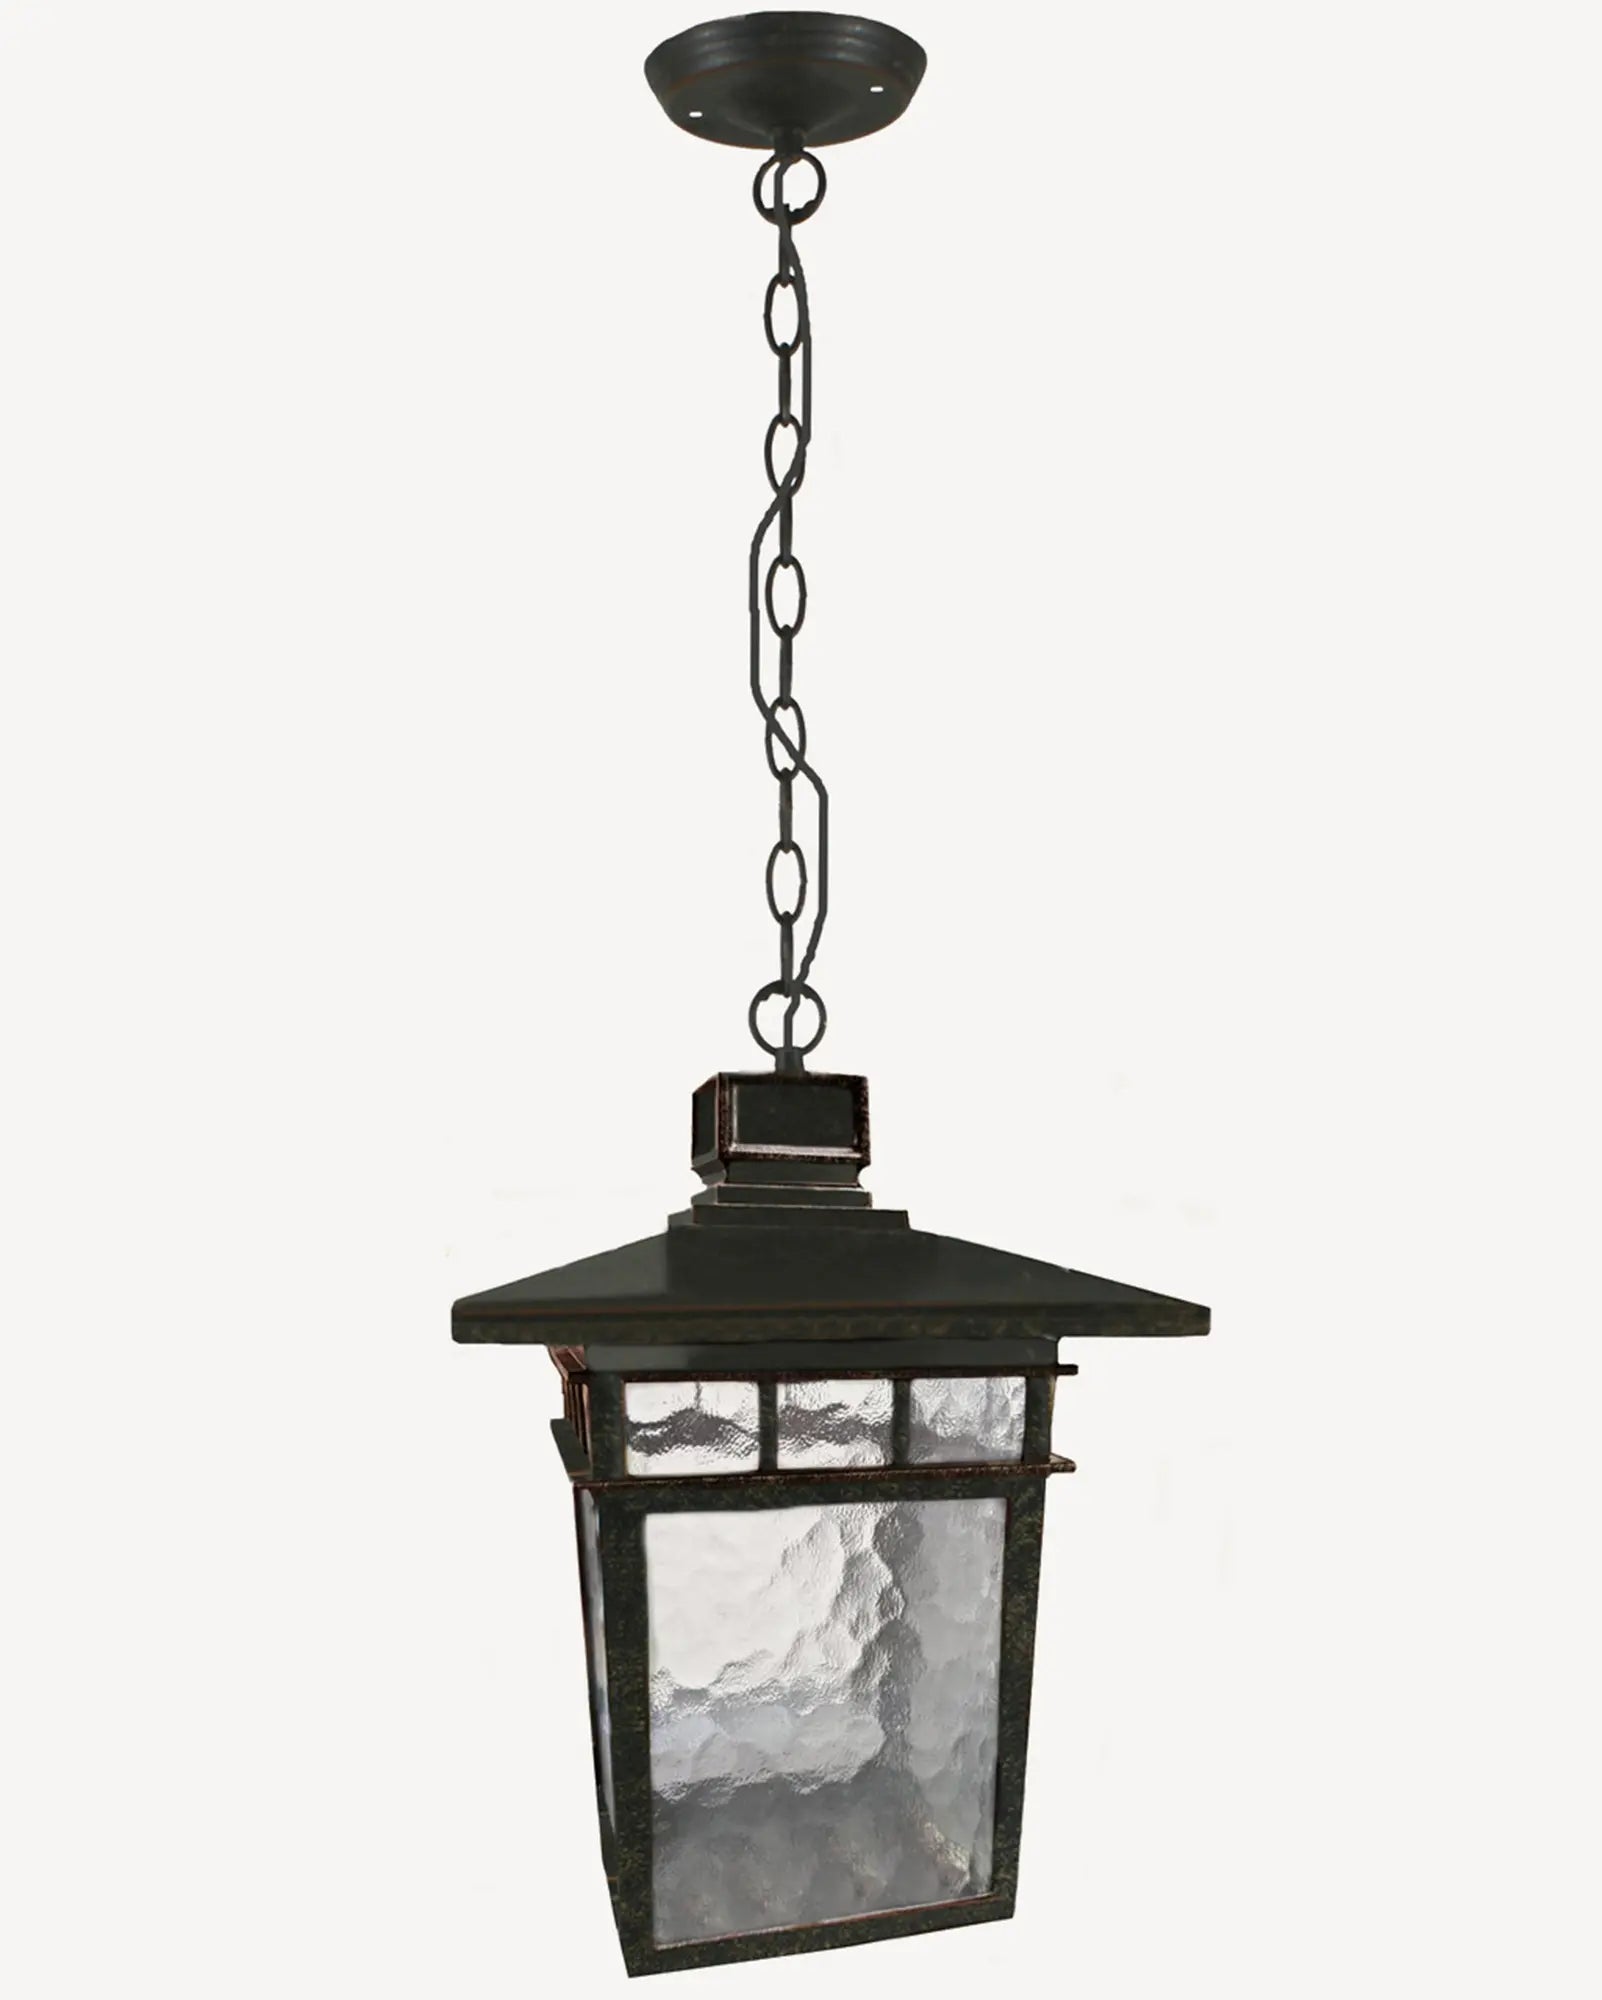 Promenade chain pendant light by Inspiration Light at Nook Collections